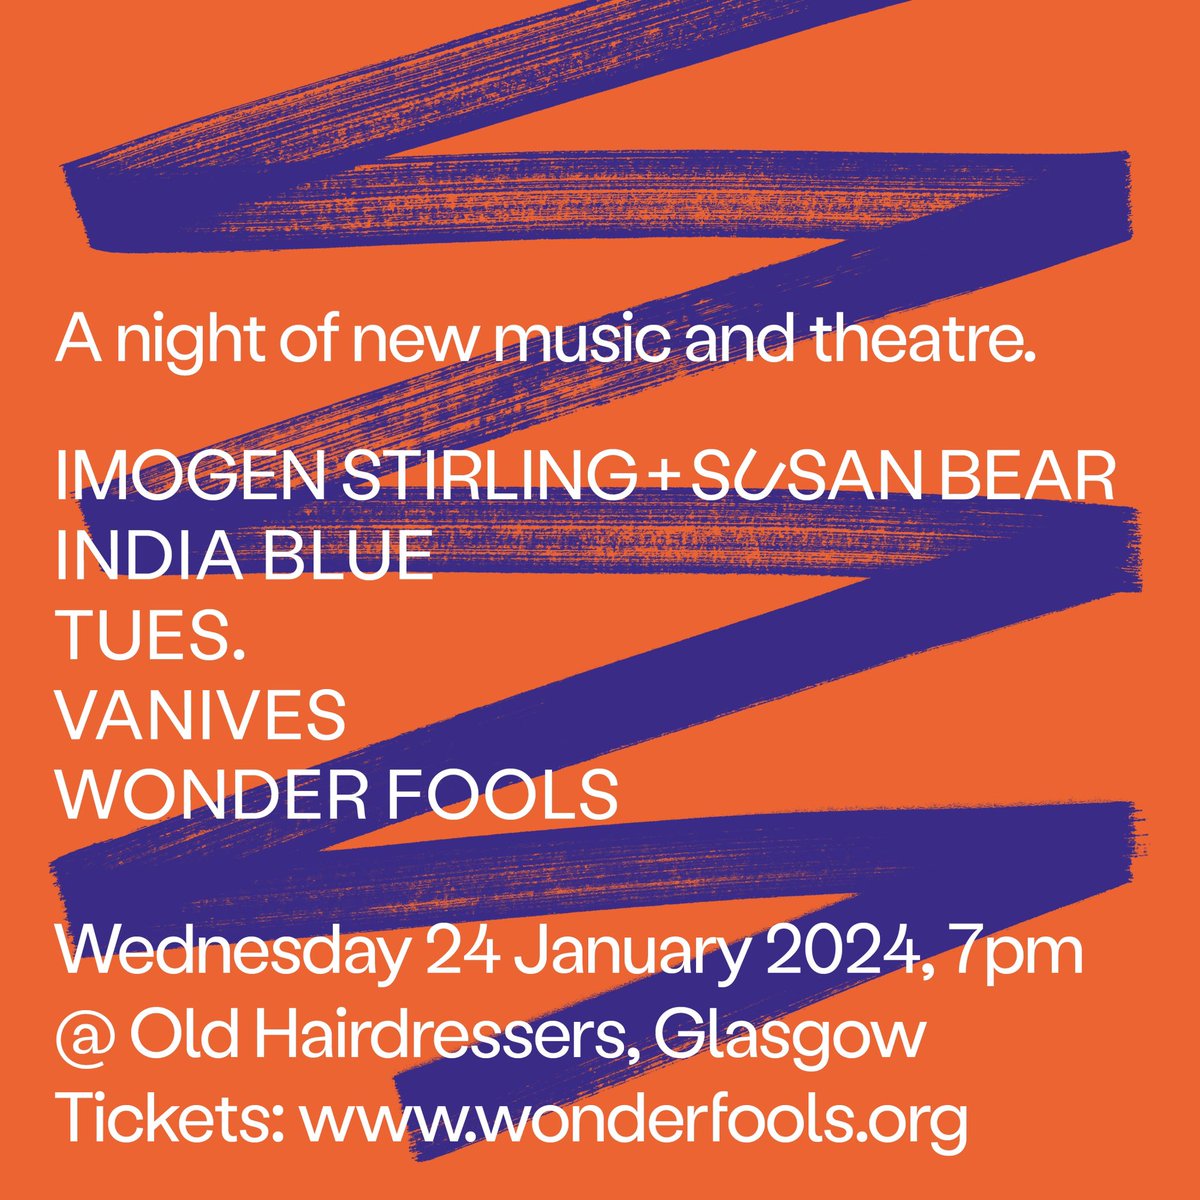 2. 🎵 We will be joined on the night by some of our favourite music and theatre artists also sharing new bits of material including VanIves; Imogen Stirling and Susan Bear; India Blue; and Tues. 🎵